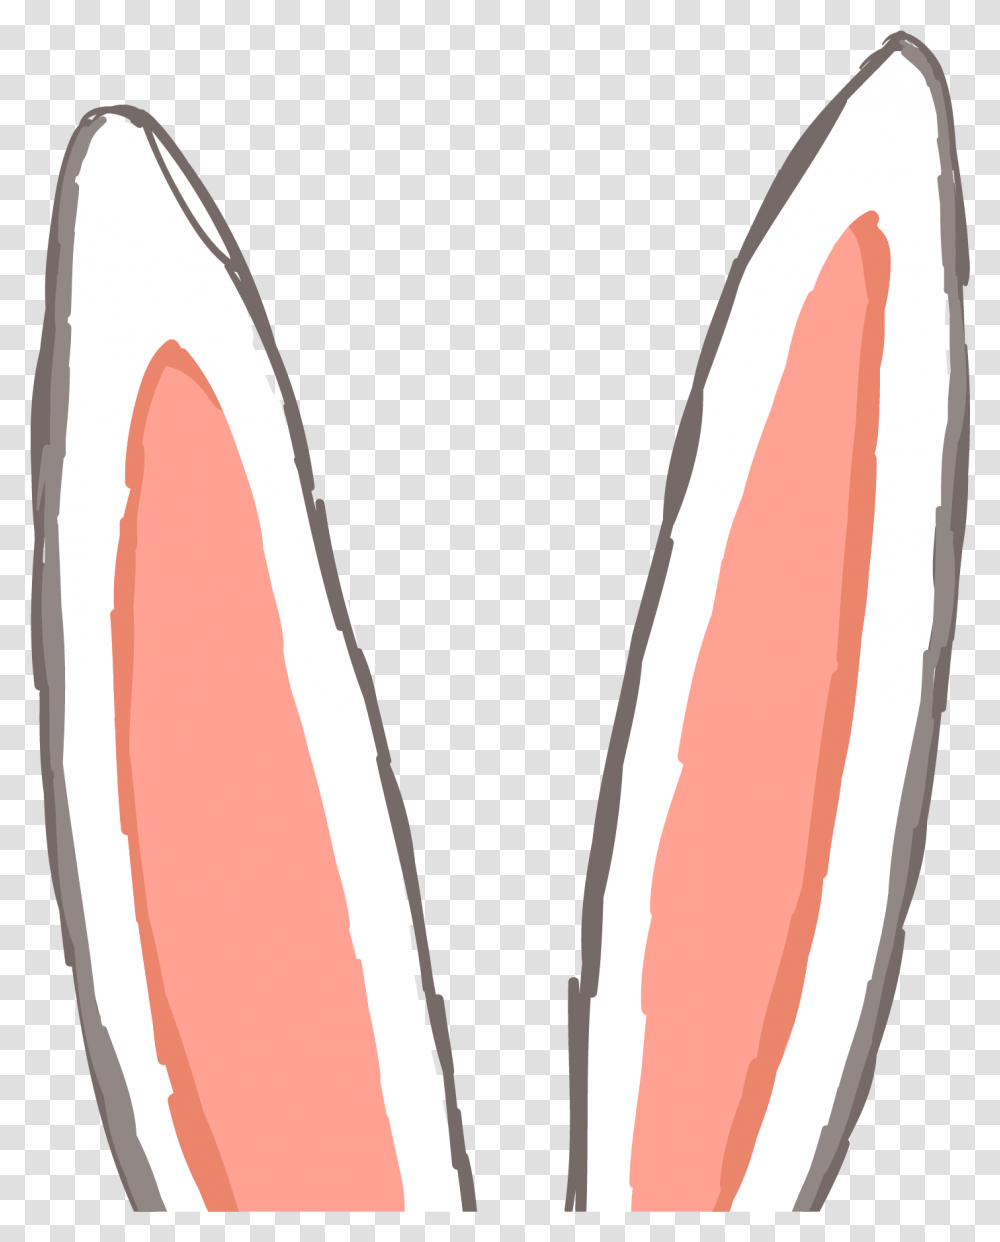 Ear Rabbit Computer File Transprent Free Background Bunny Ears, Sweets, Food, Cosmetics, Brush Transparent Png